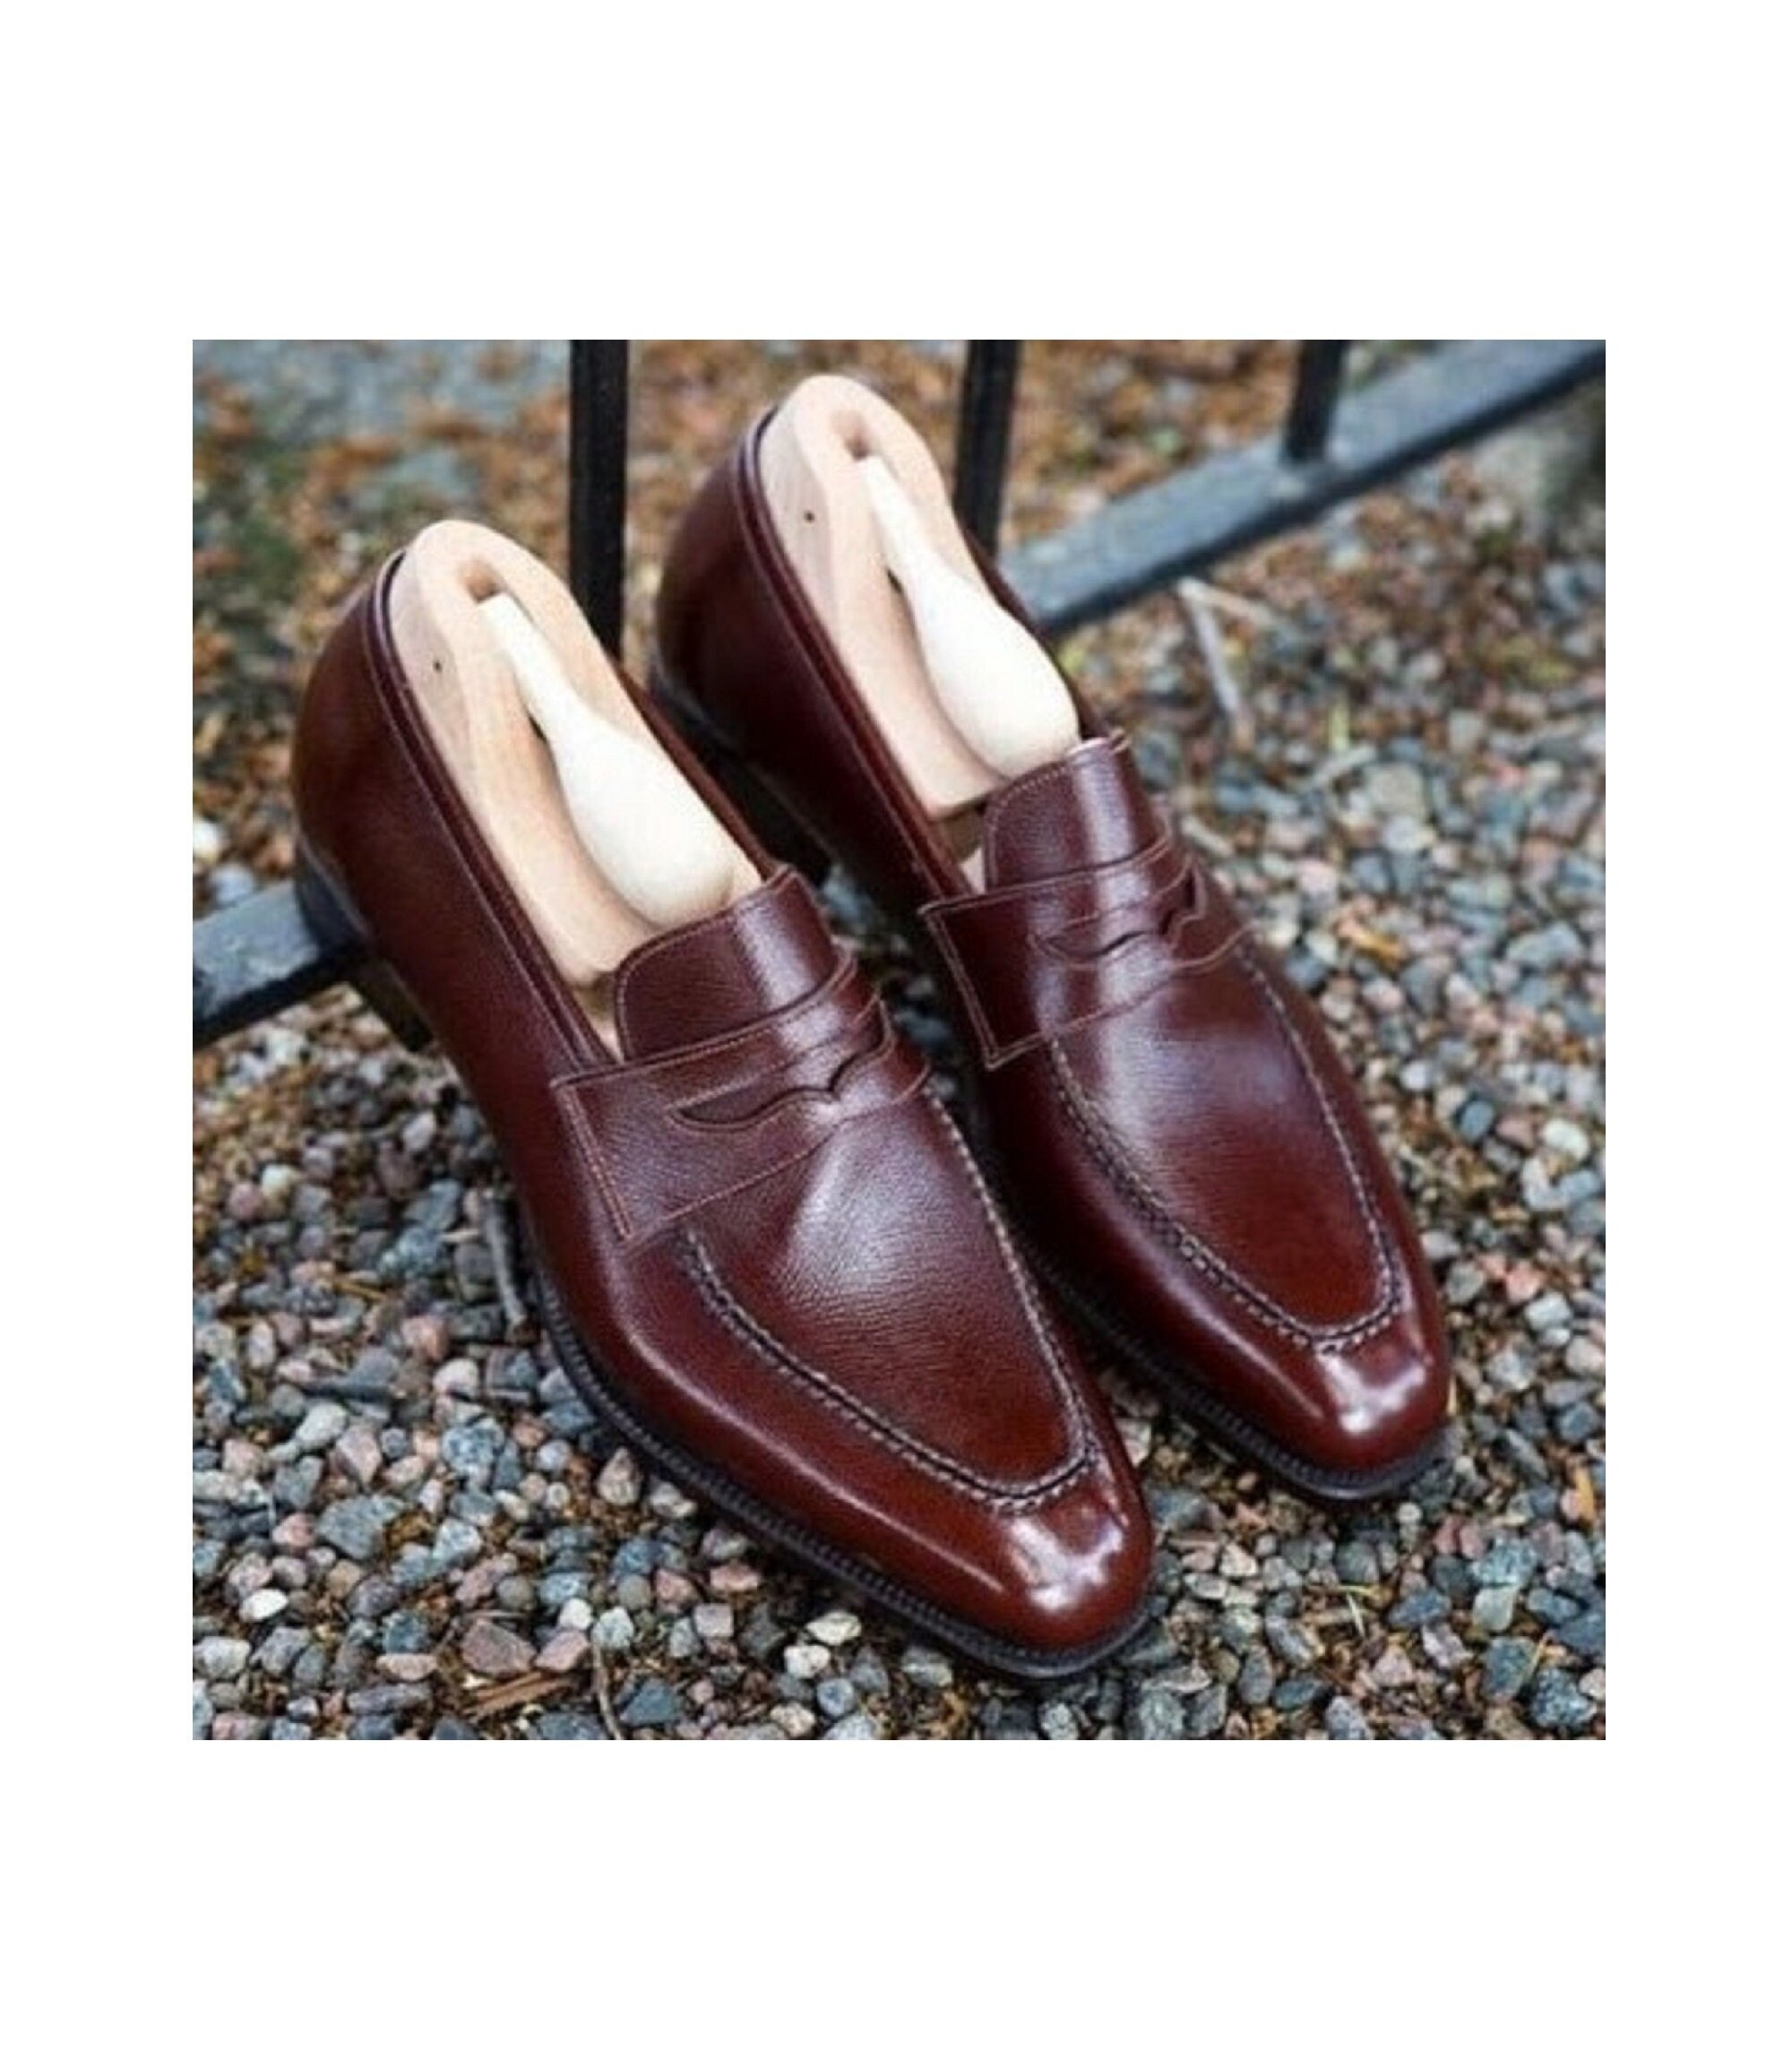 Handmade Burgundy patina Leather Loafers Men Dress Shoes Custom Made On Orders, Gift for him, Men Shoes